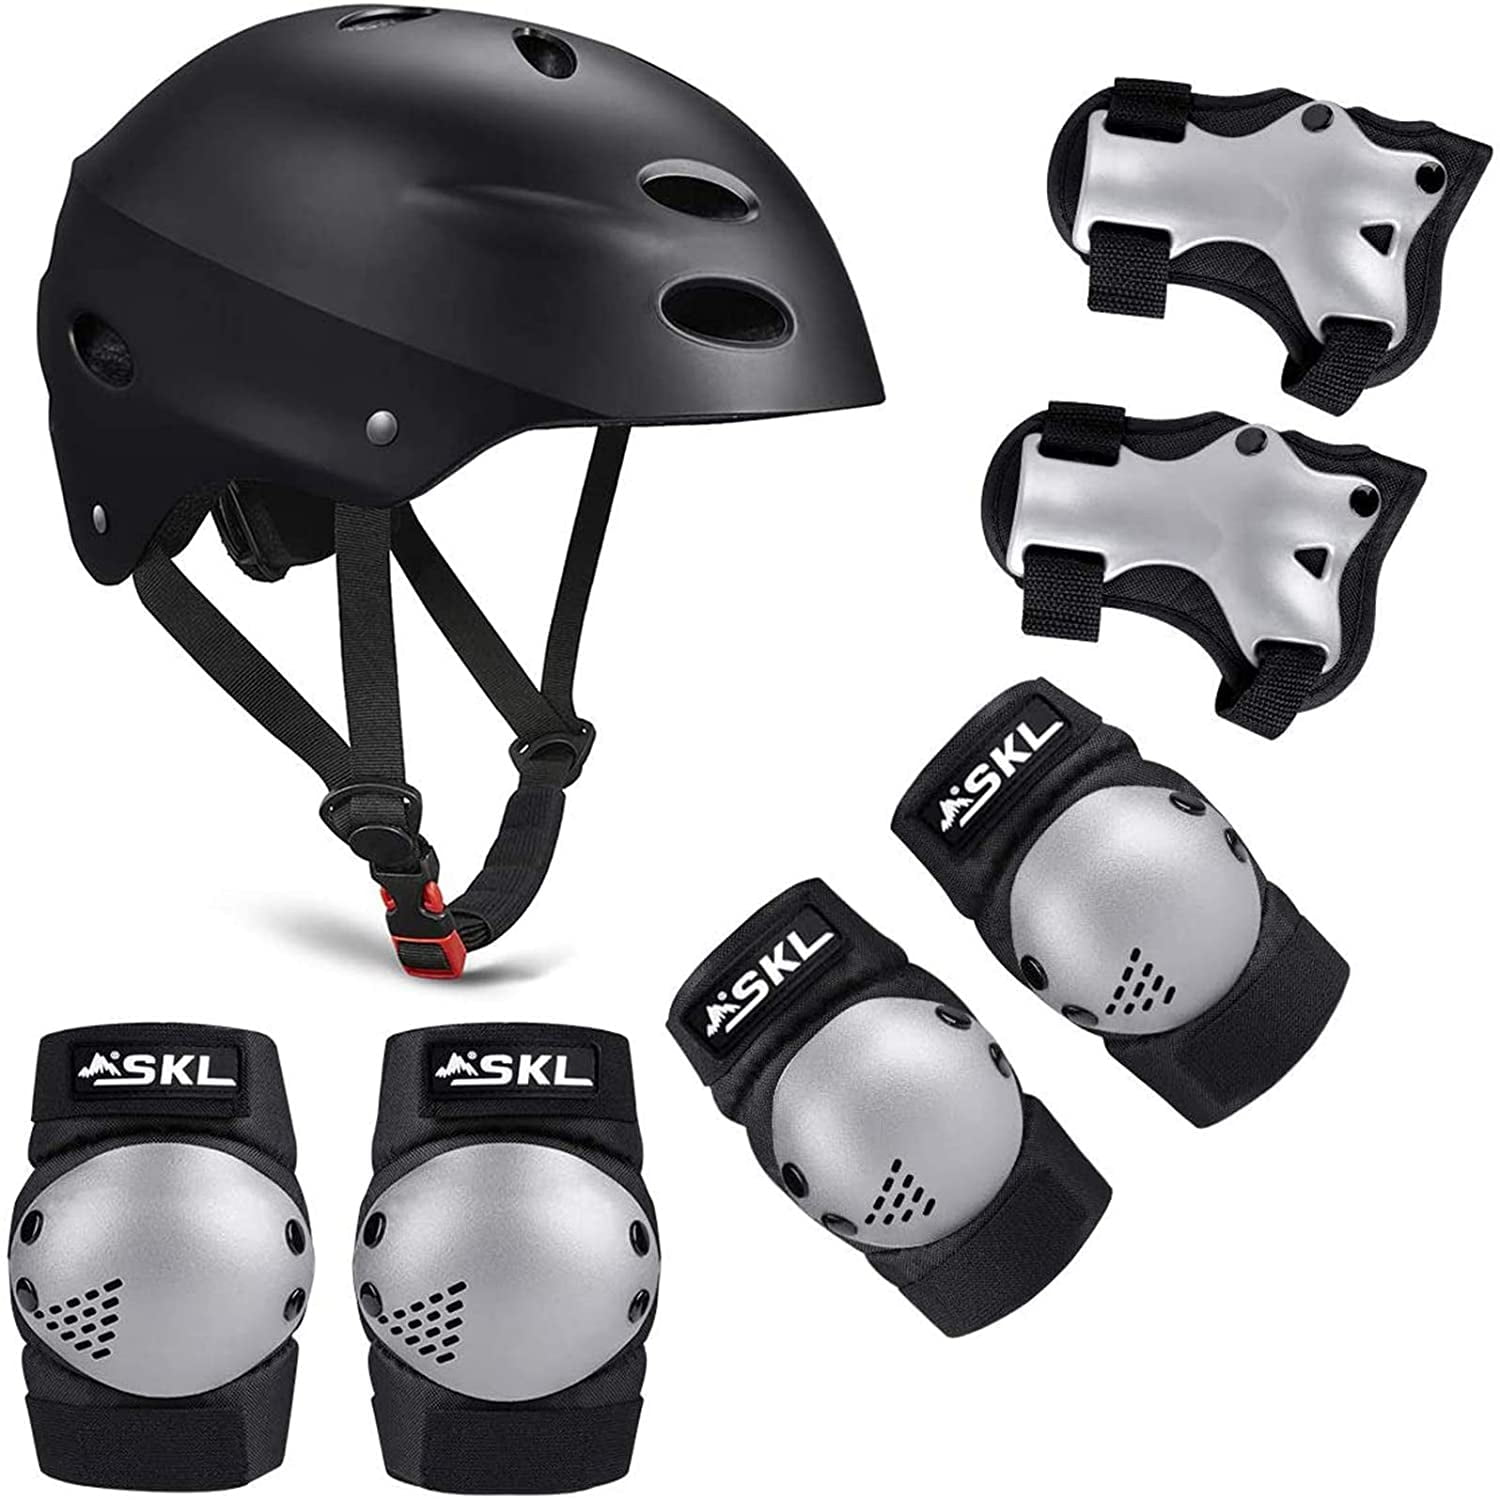 Cute Child Helmet with Adjustable Size from Toddler to Youth for Multi-Sports Cycling Skateboarding Riding BMX Rollerblading Besmall Kids Bike Helmet